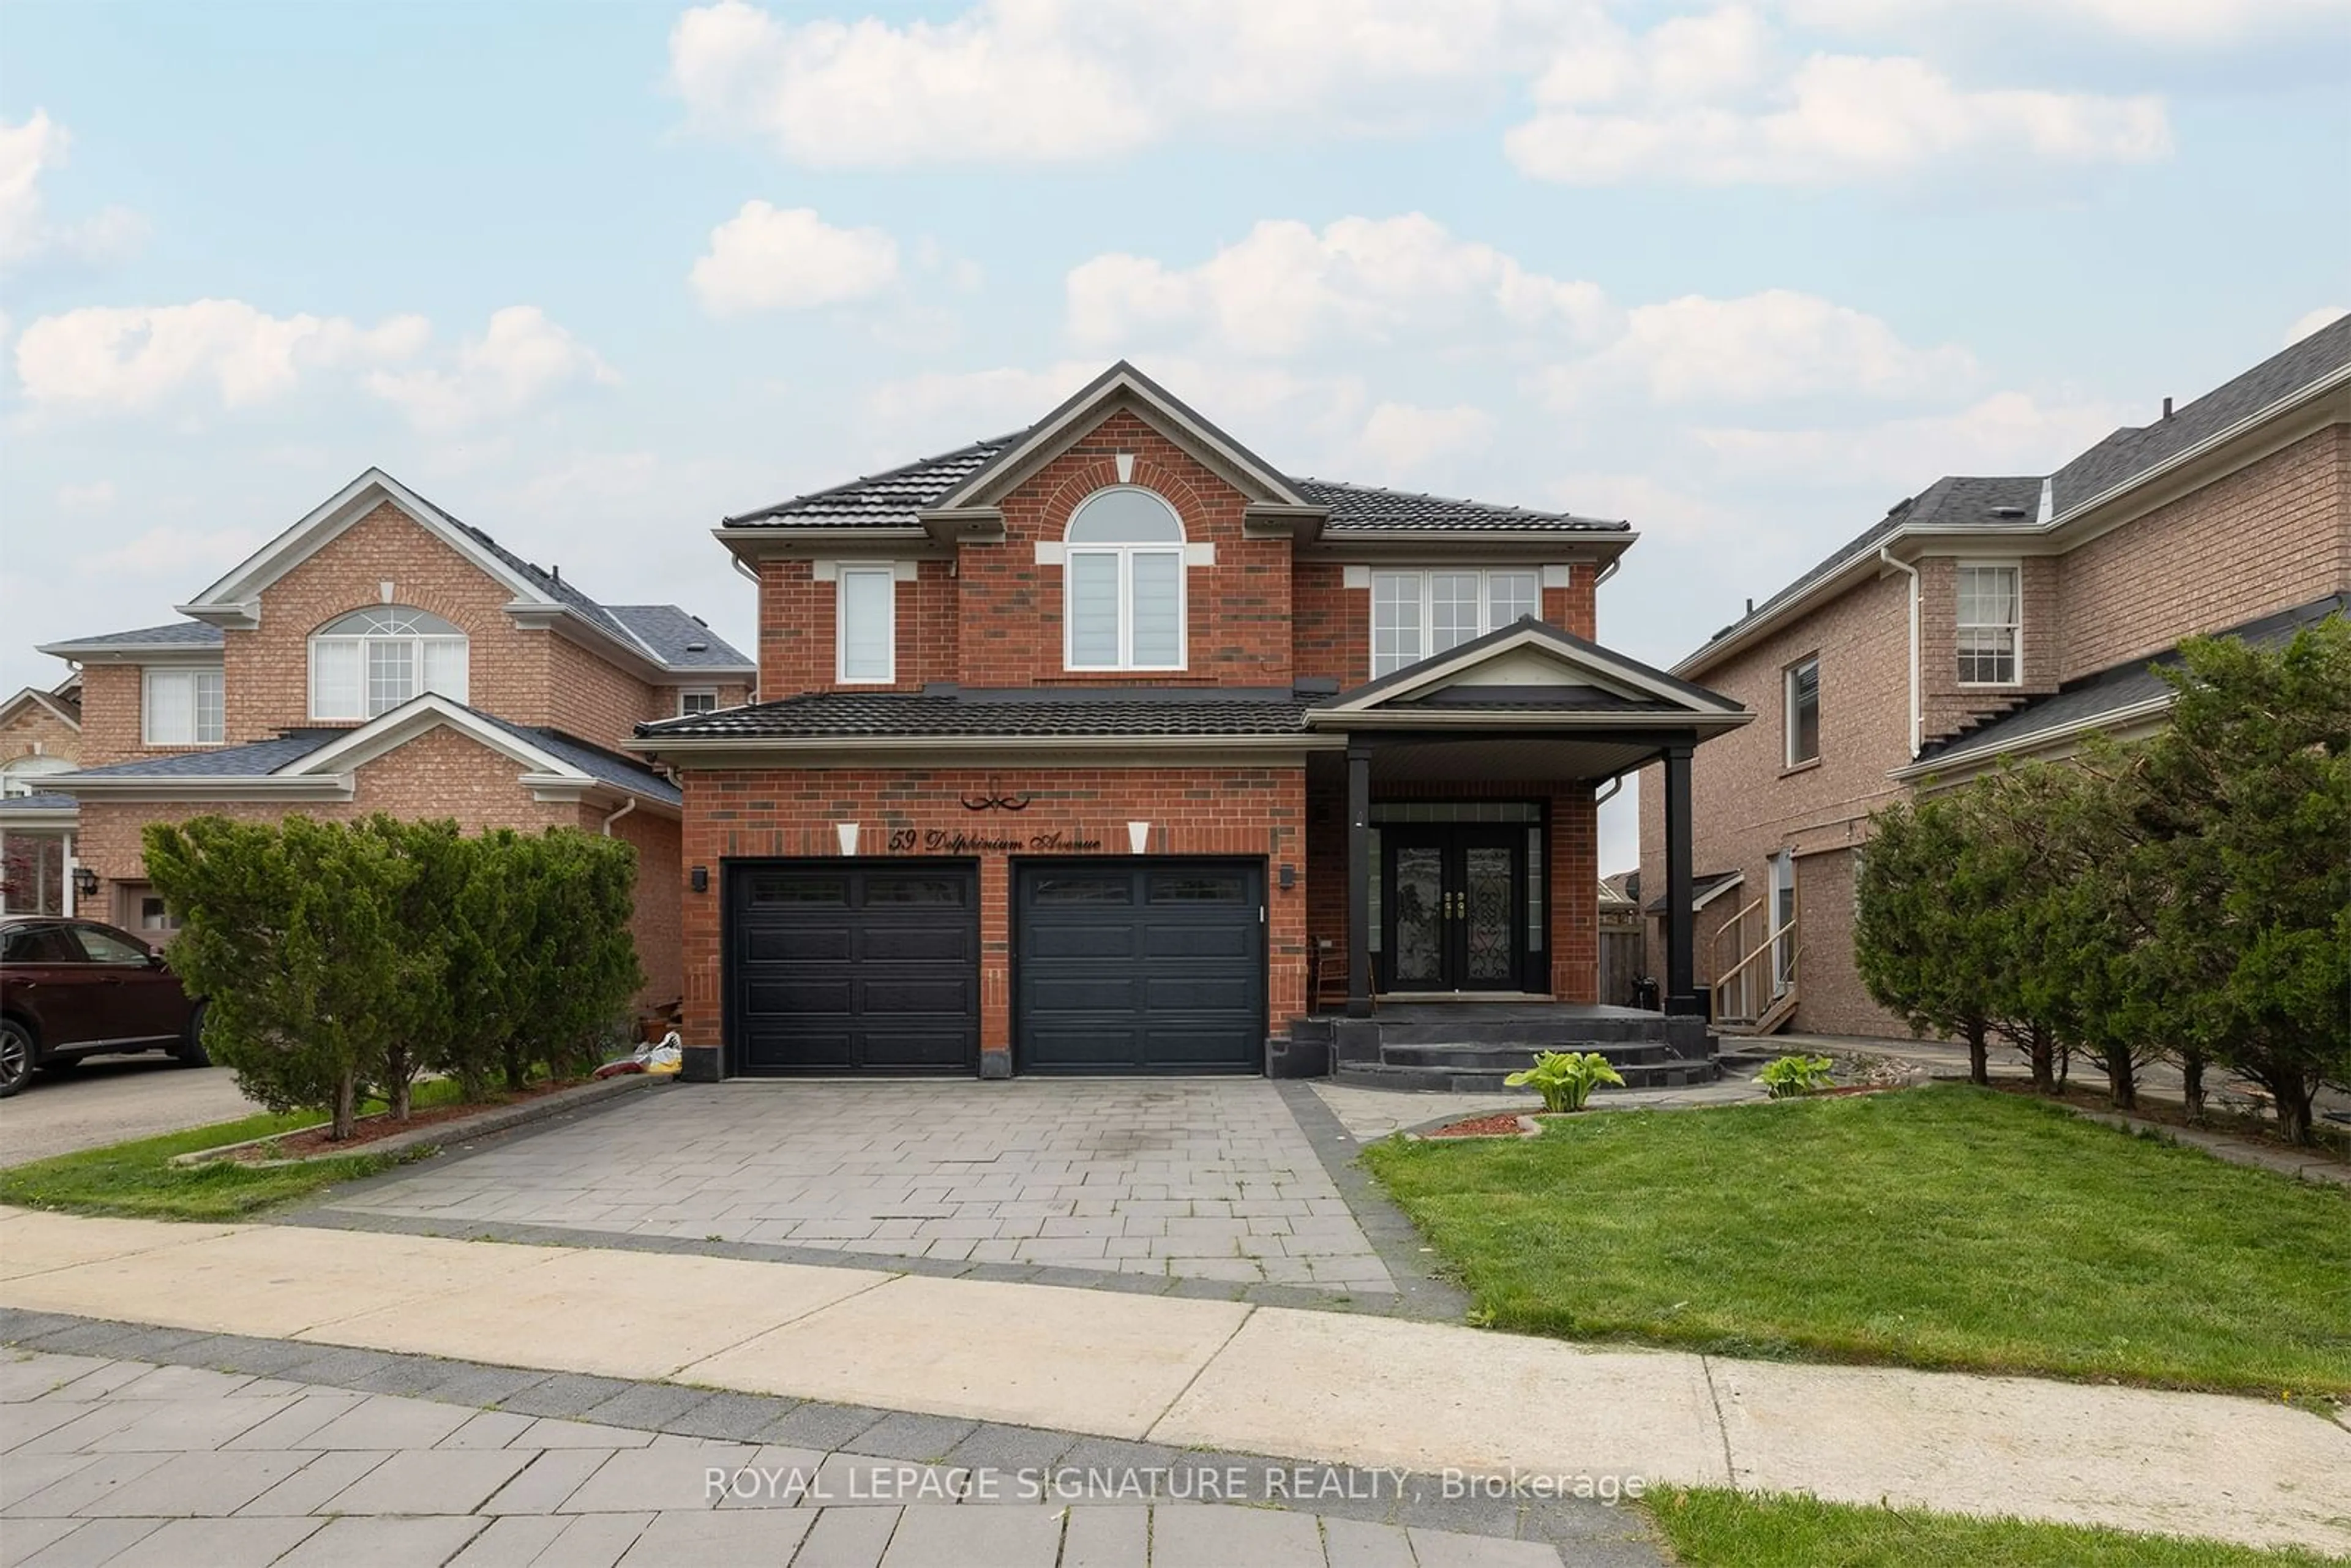 Home with brick exterior material for 59 Delphinium Ave, Richmond Hill Ontario L4E 4N5